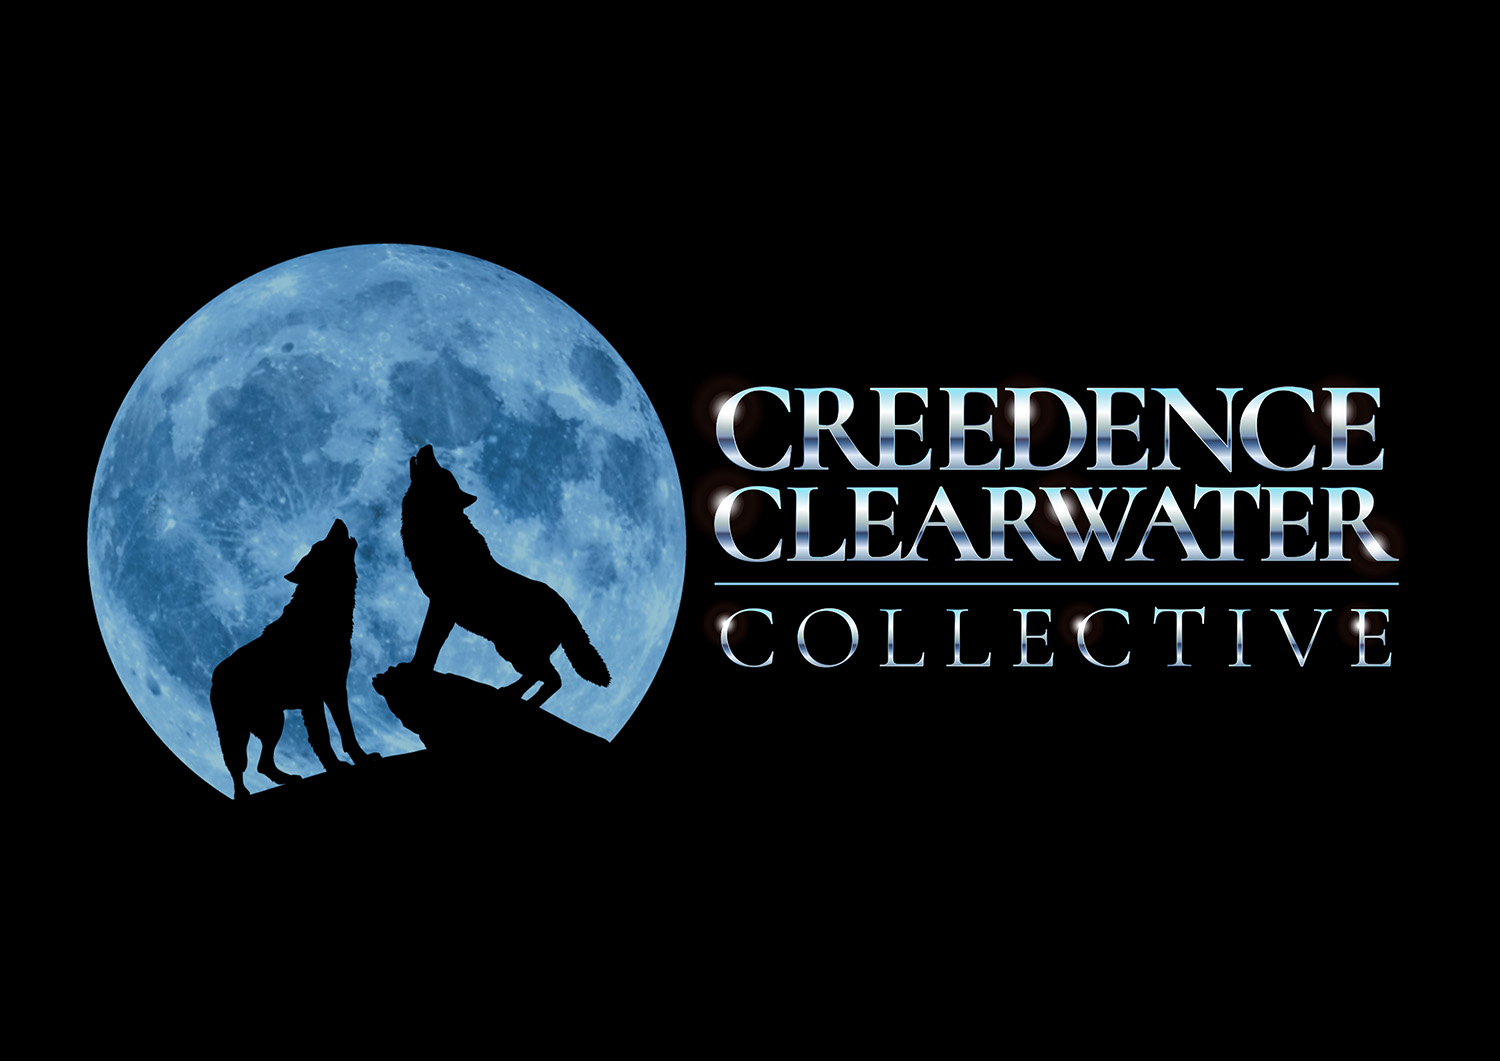 Creedance Clearwater Collective